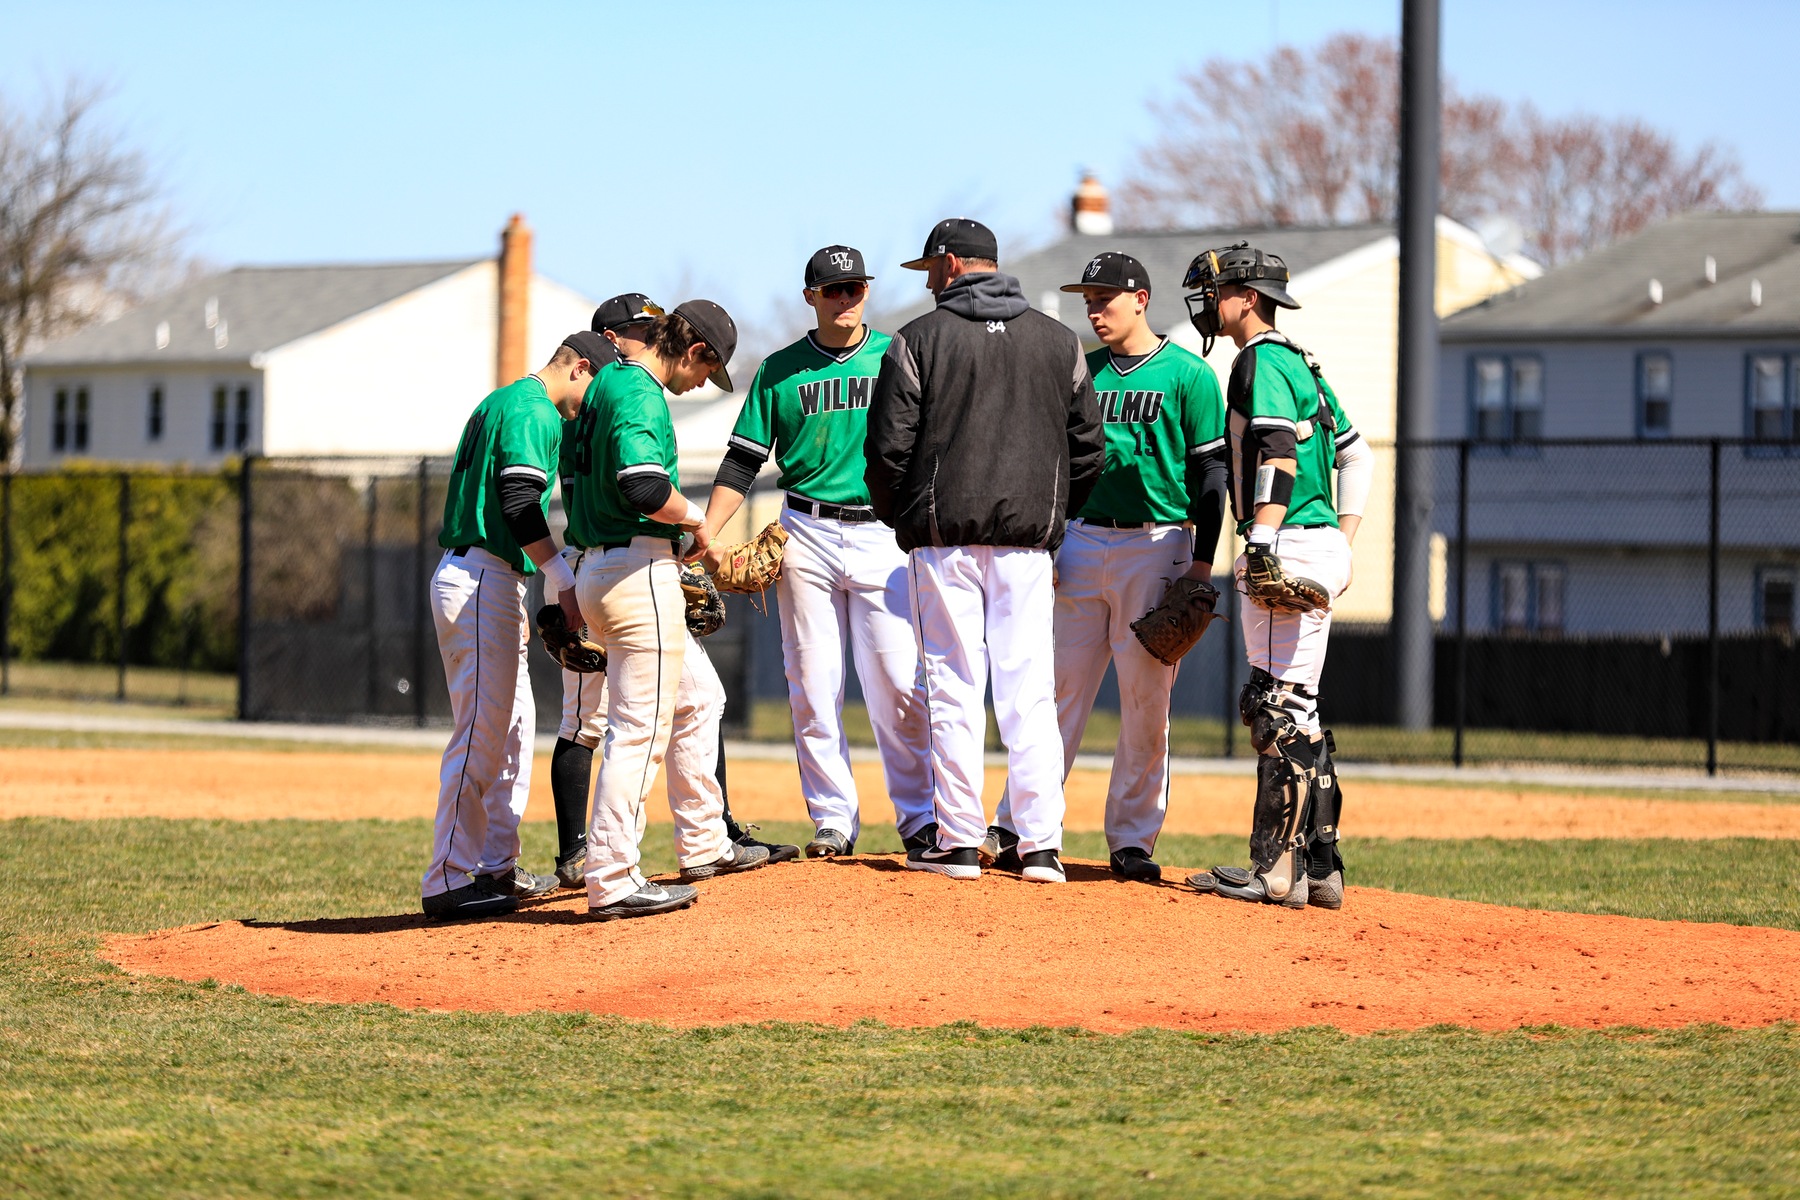 Copyright 2019; Wilmington University. All rights reserved. Photo by Chris Vitale. March 26, 2019 vs. Chestnut Hill.